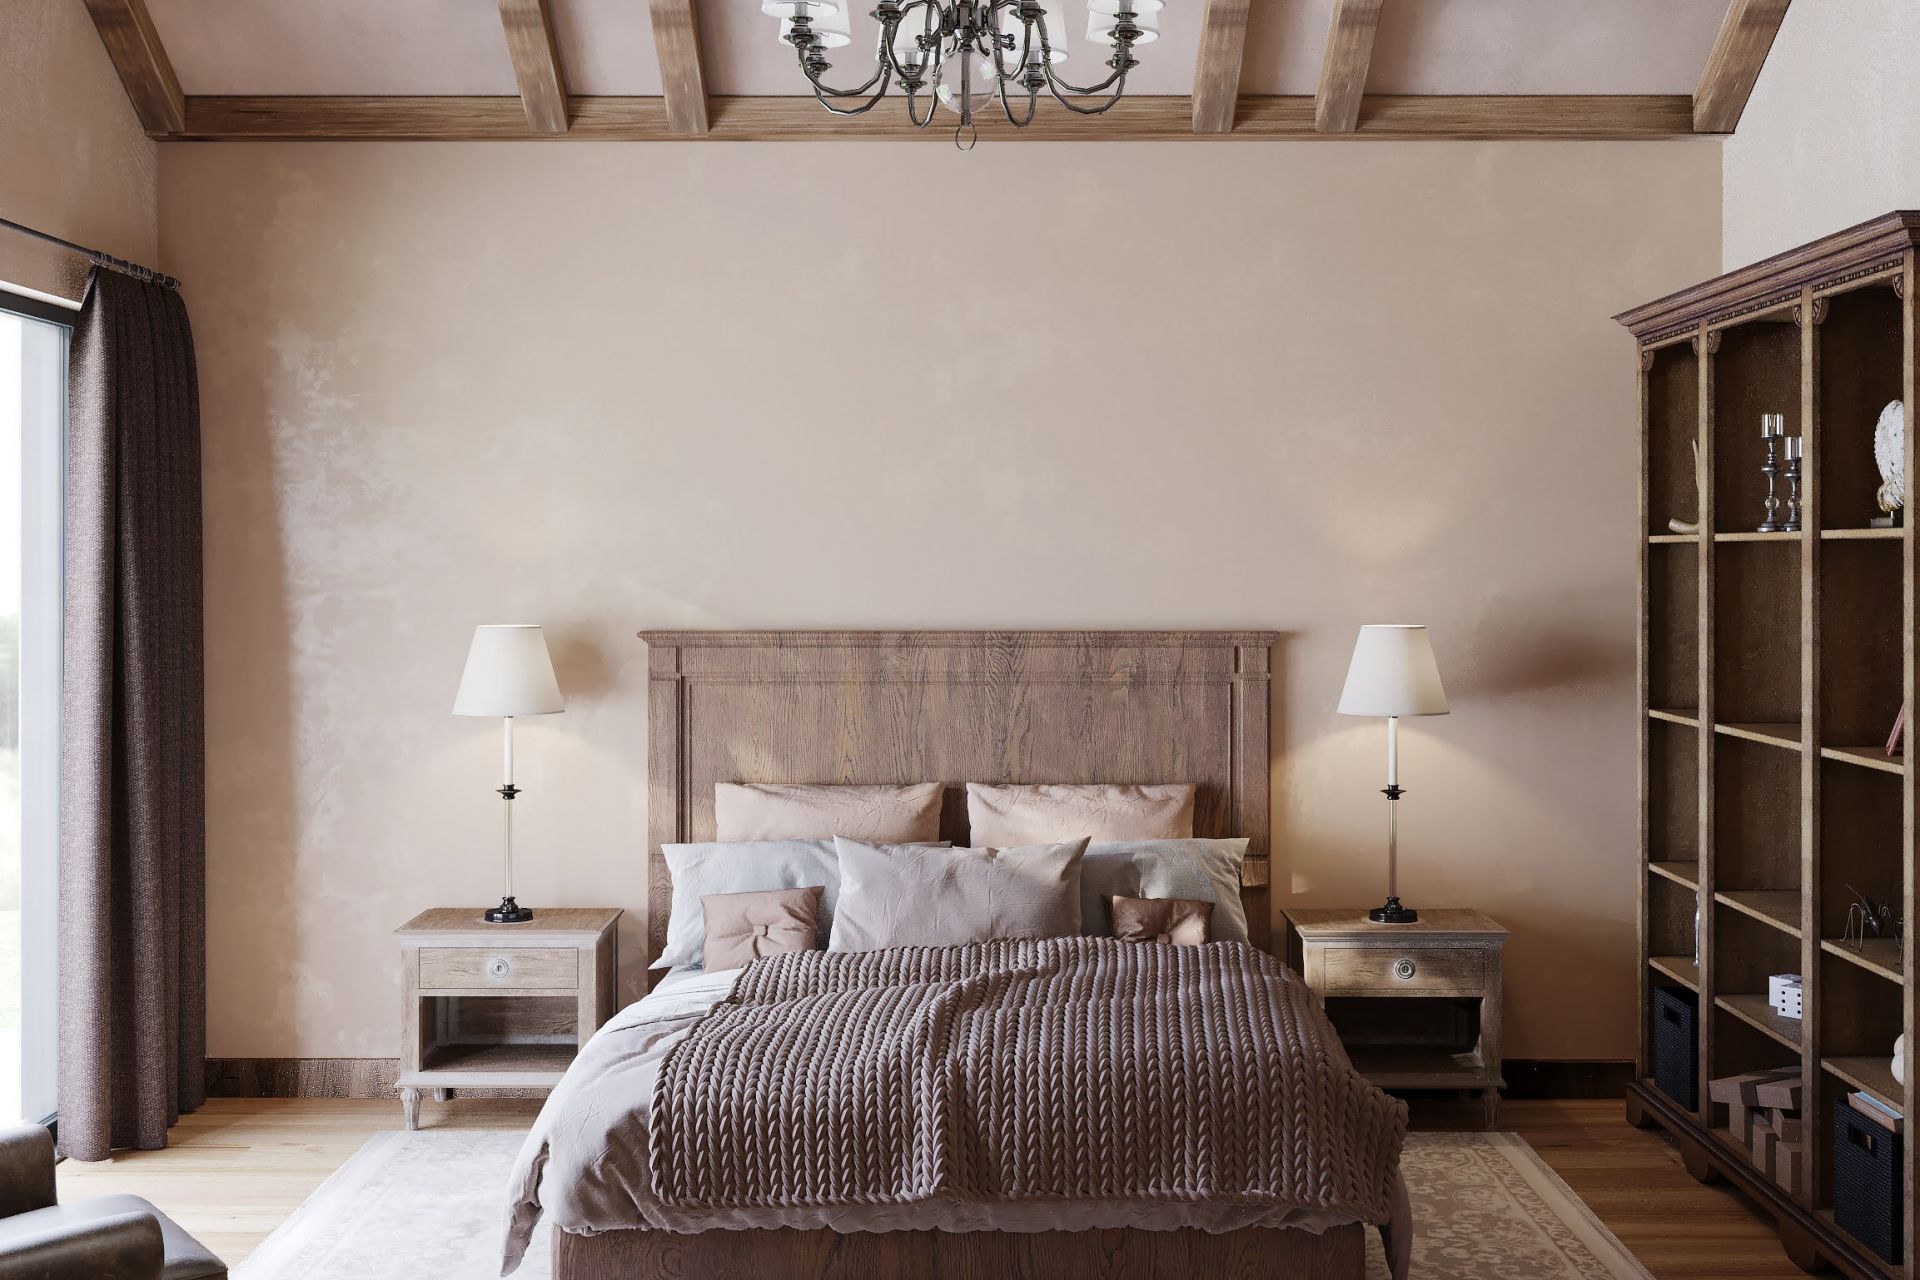 Laconic bedroom in a country house